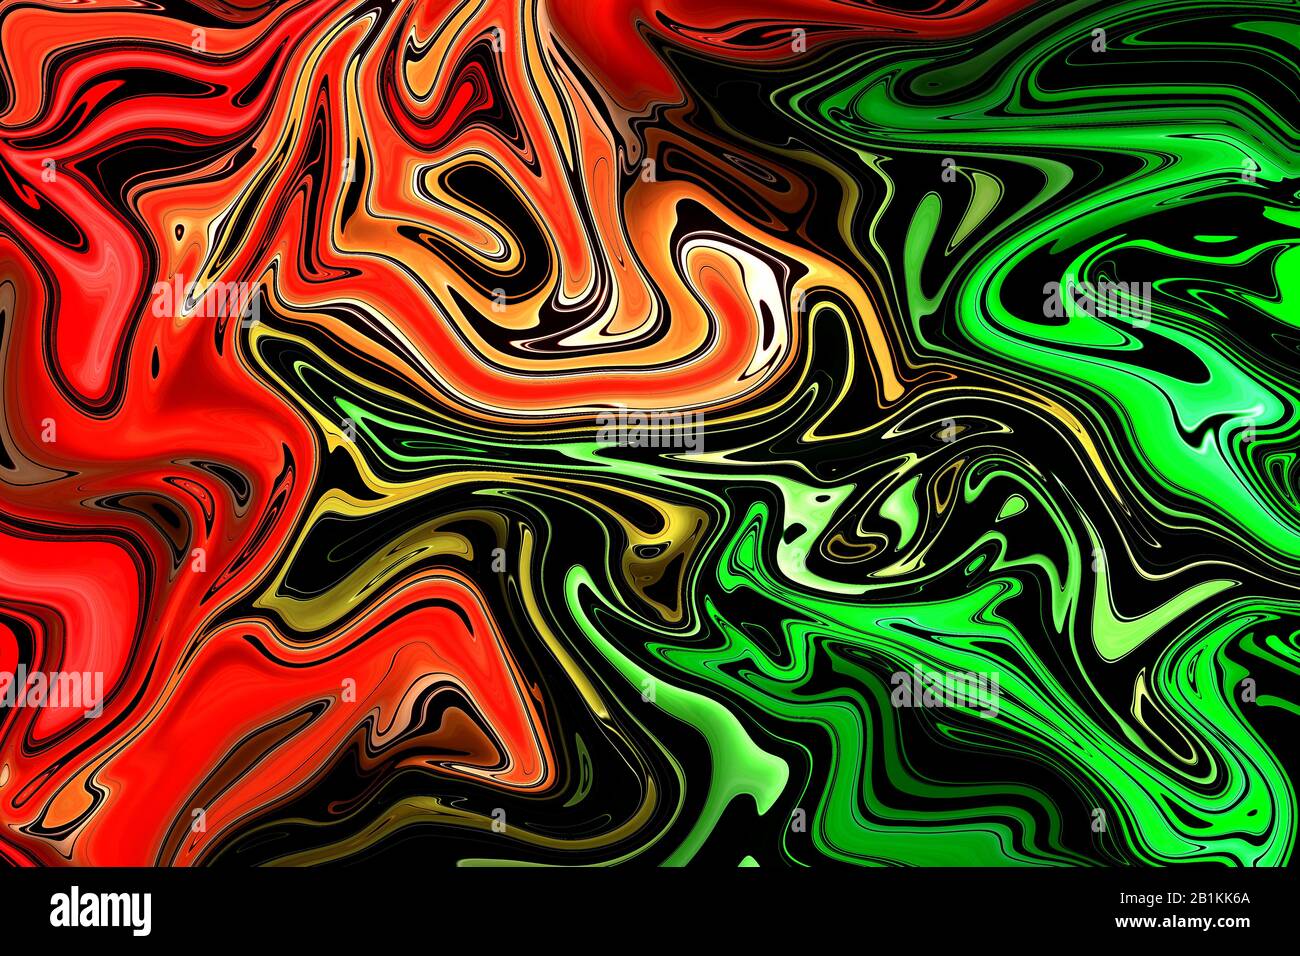 Red And Green Liquid Color Abstract Background And Texture Illustration Design Stock Photo Alamy